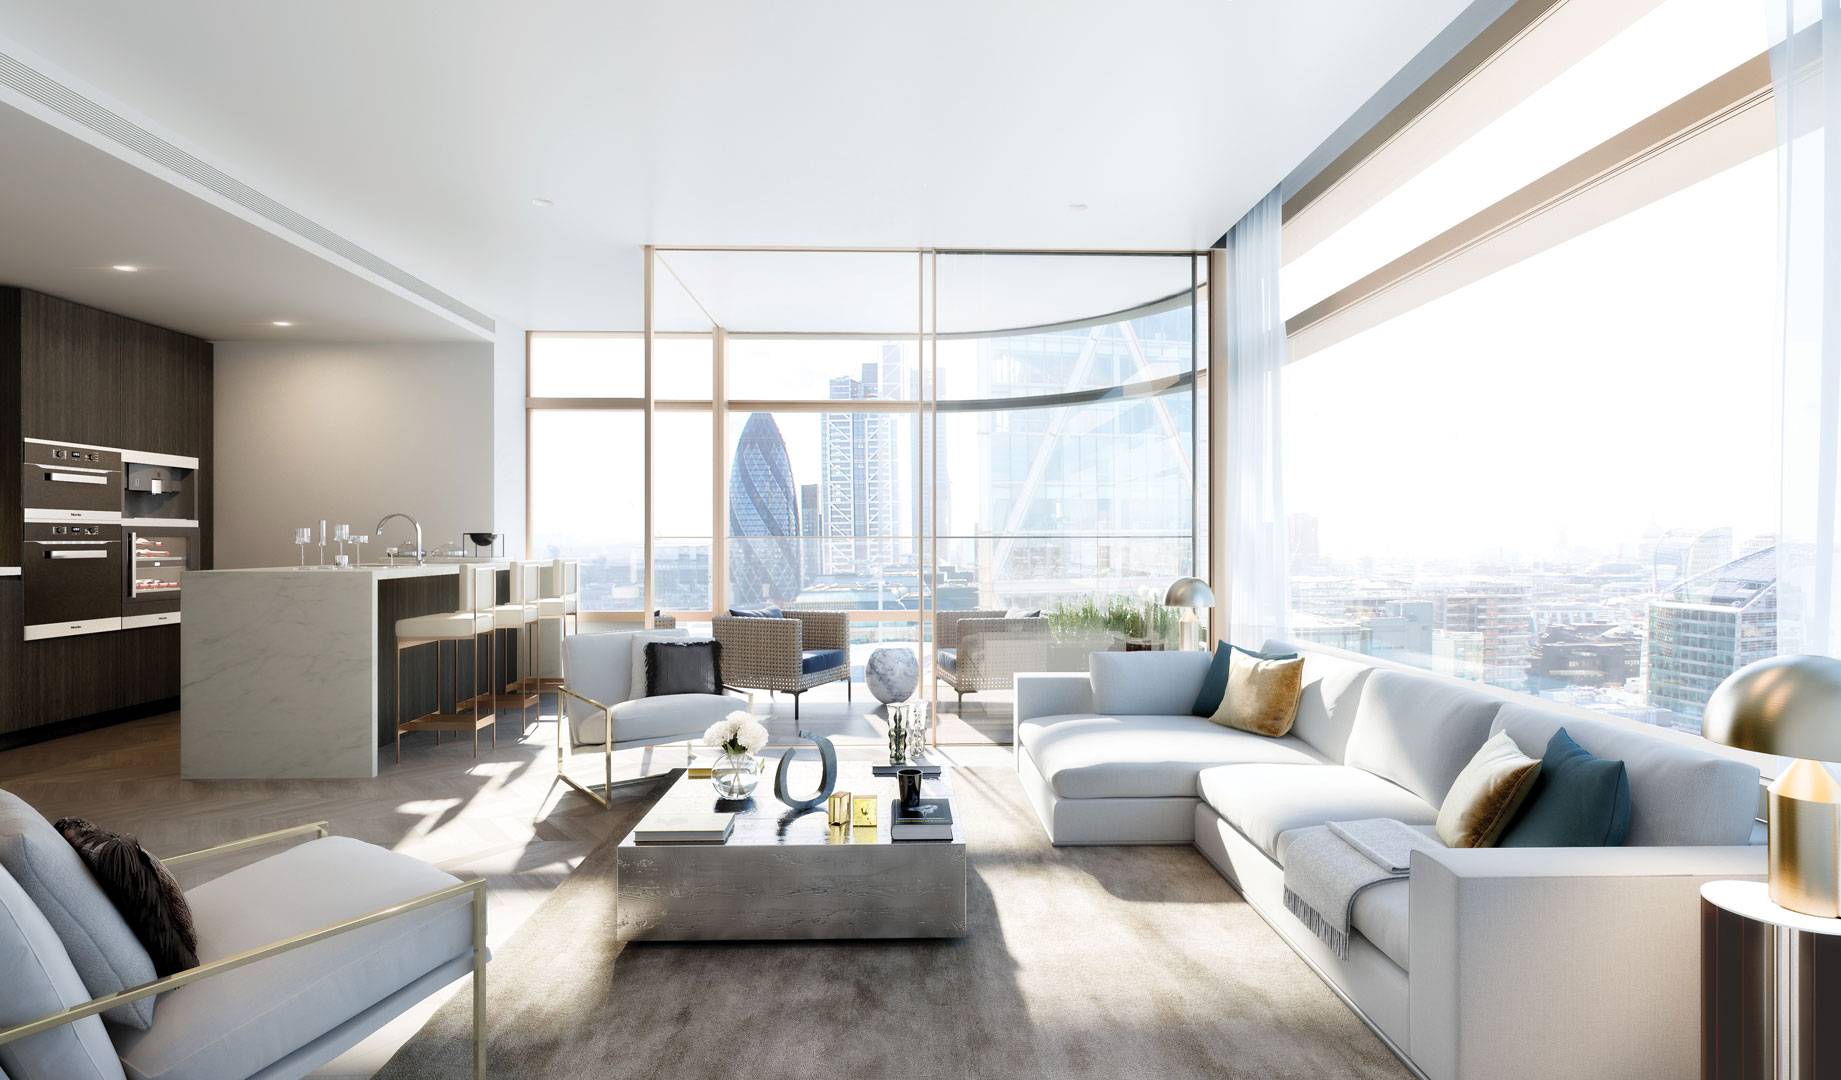 Breathtaking Penthouse On The 45th Floor Of Principal Tower Providing Incredible City Views